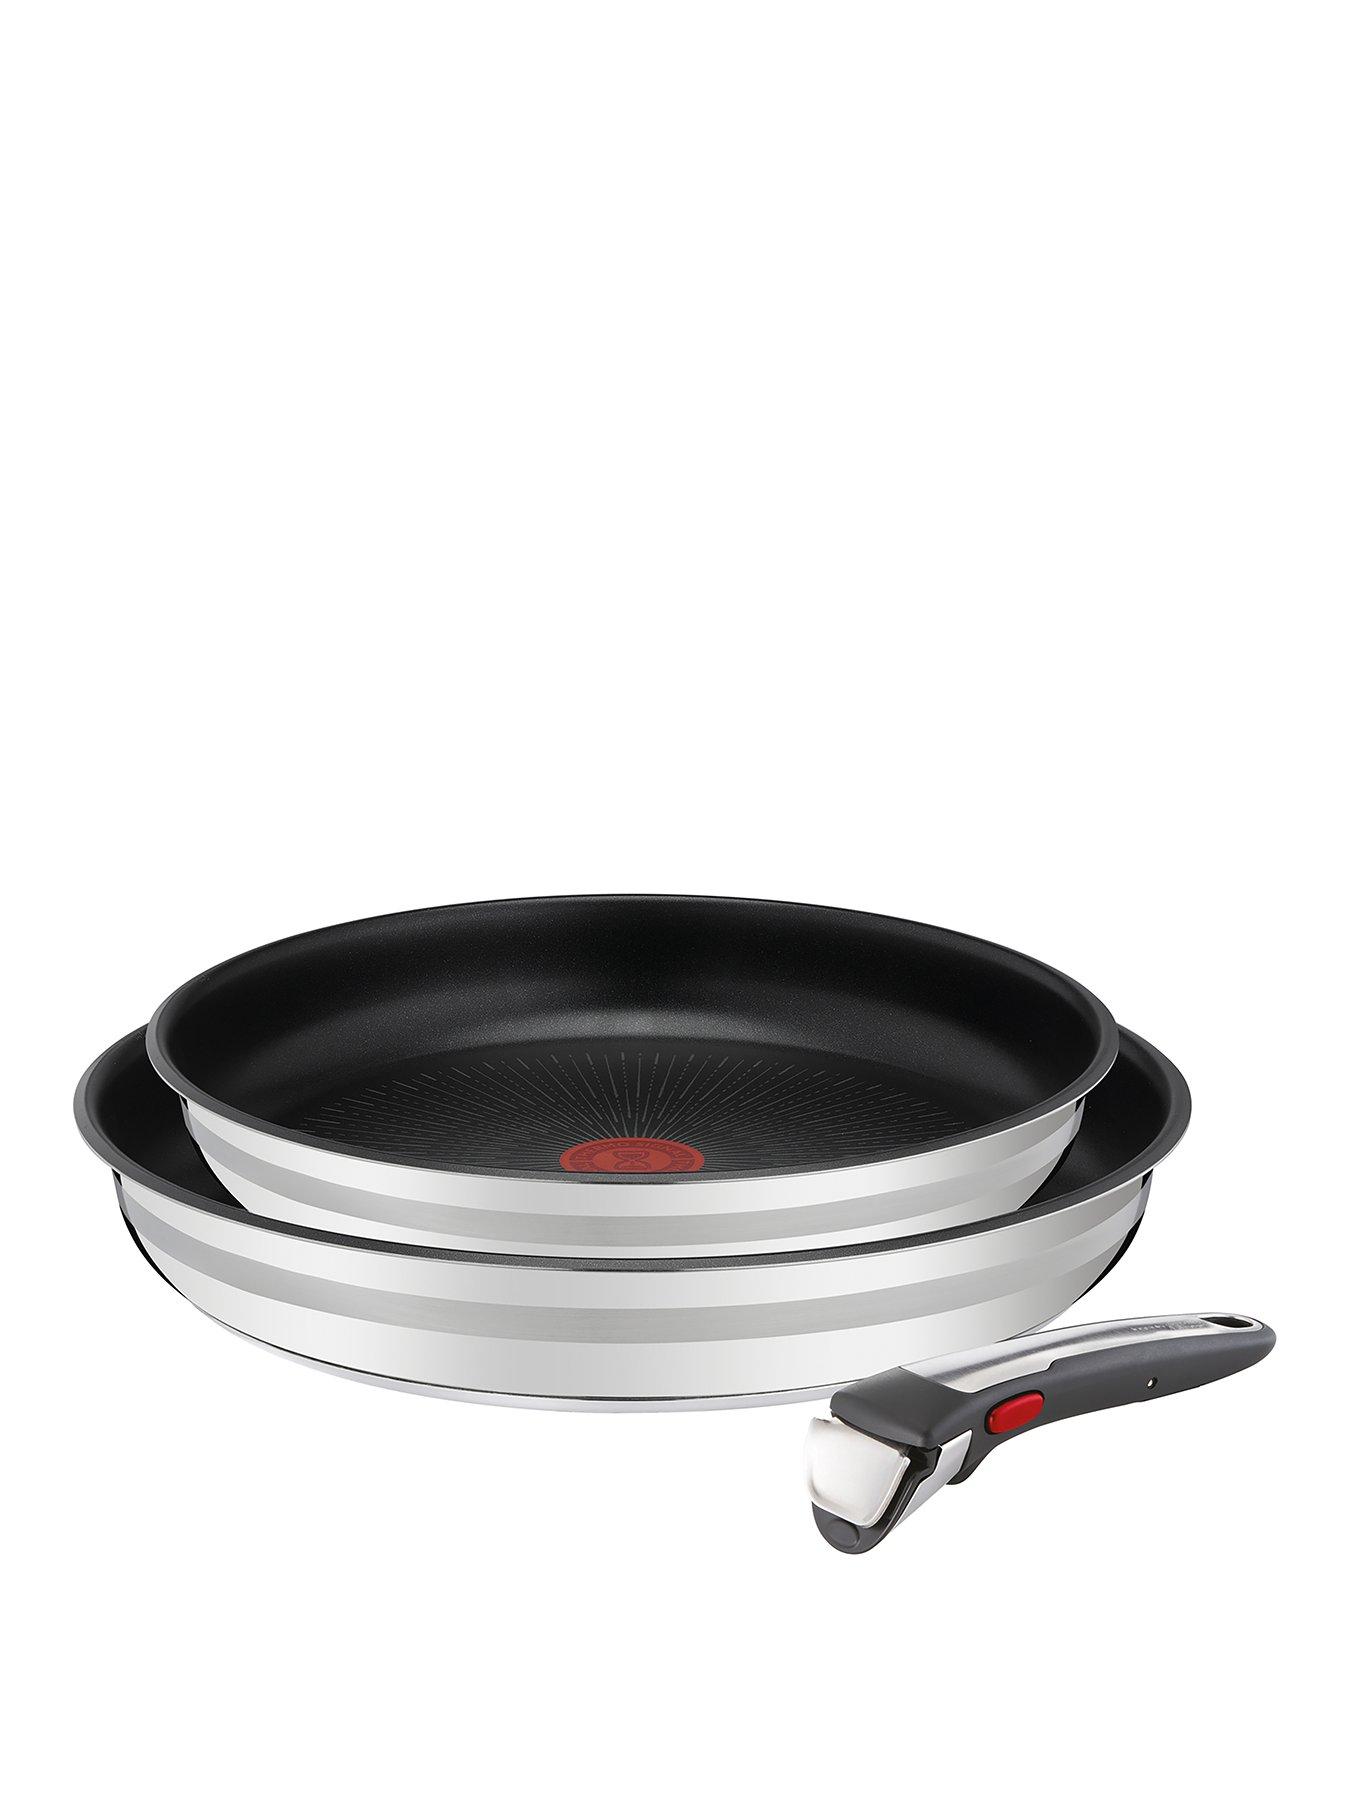 https://media.very.ie/i/littlewoodsireland/VLJPE_SQ1_0000000088_NO_COLOR_SLf/tefal-jamie-oliver-by-tefal-ingenio-3-piece-removable-handle-stackable-induction-compatible-frying-pan-set.jpg?$180x240_retinamobilex2$